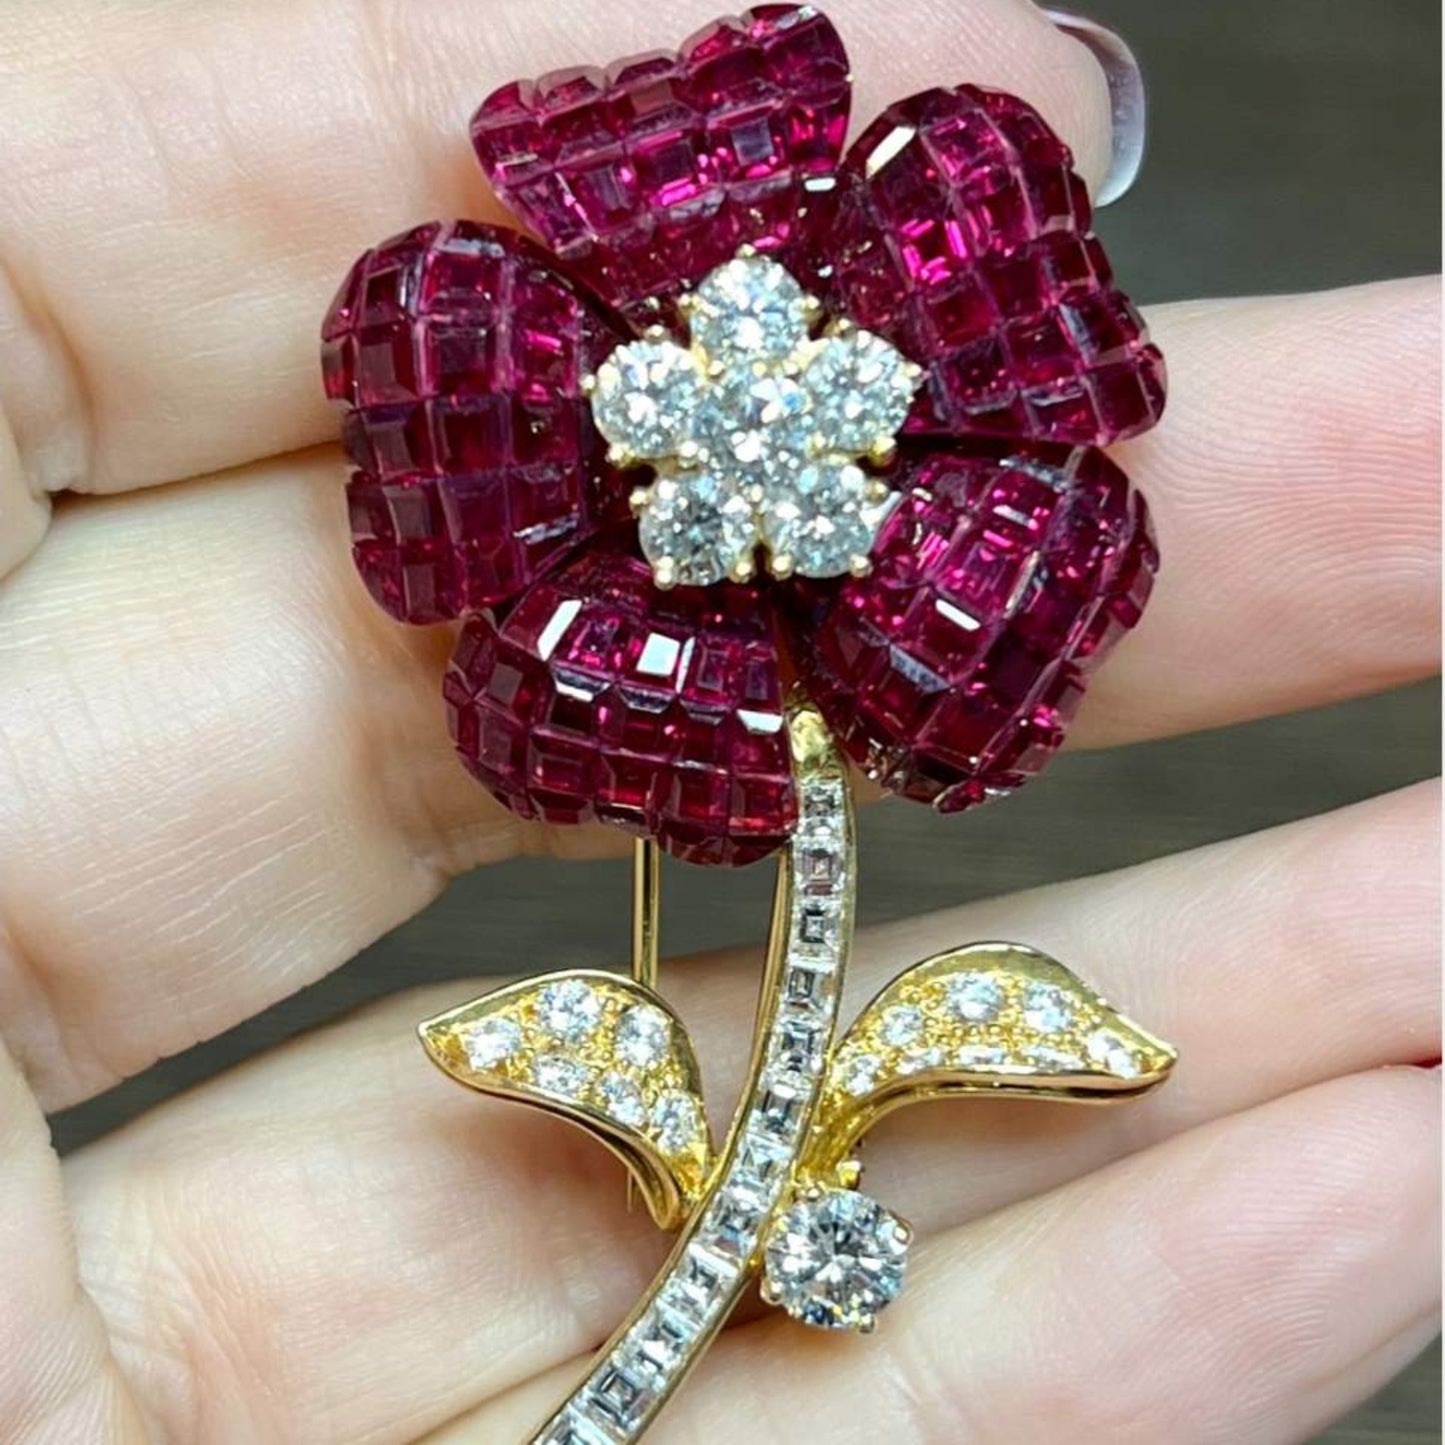 Post-1980s 18KT Yellow Gold Ruby & Diamond Flower Brooch in hand